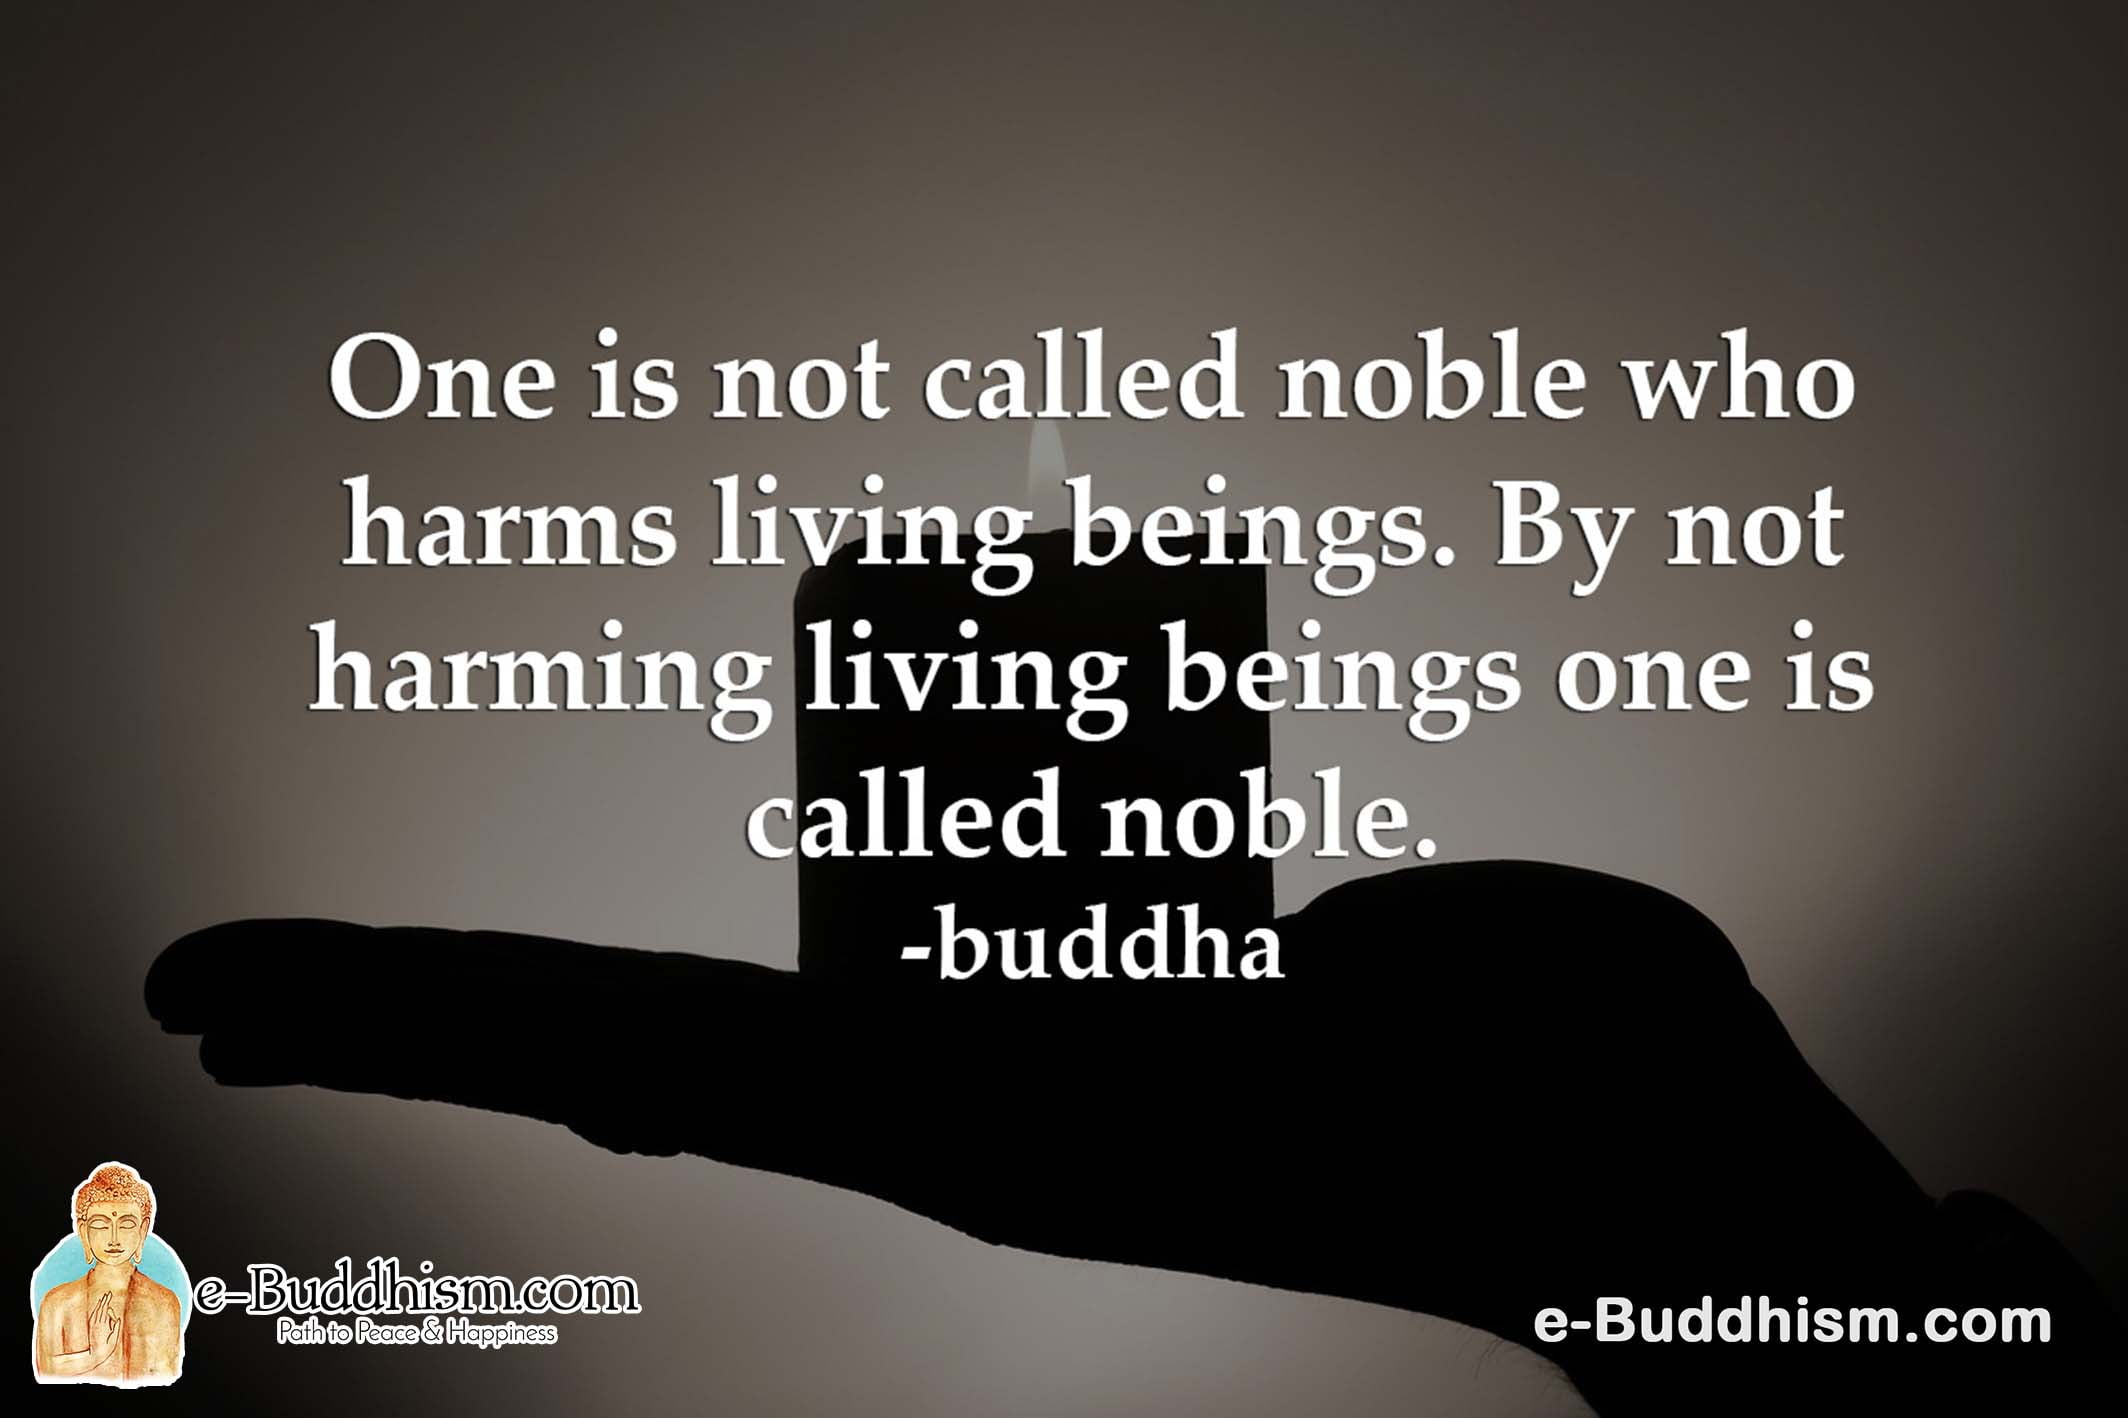 One is not called a noble who harms living beings. By not harming living beings one is called noble. -Buddha